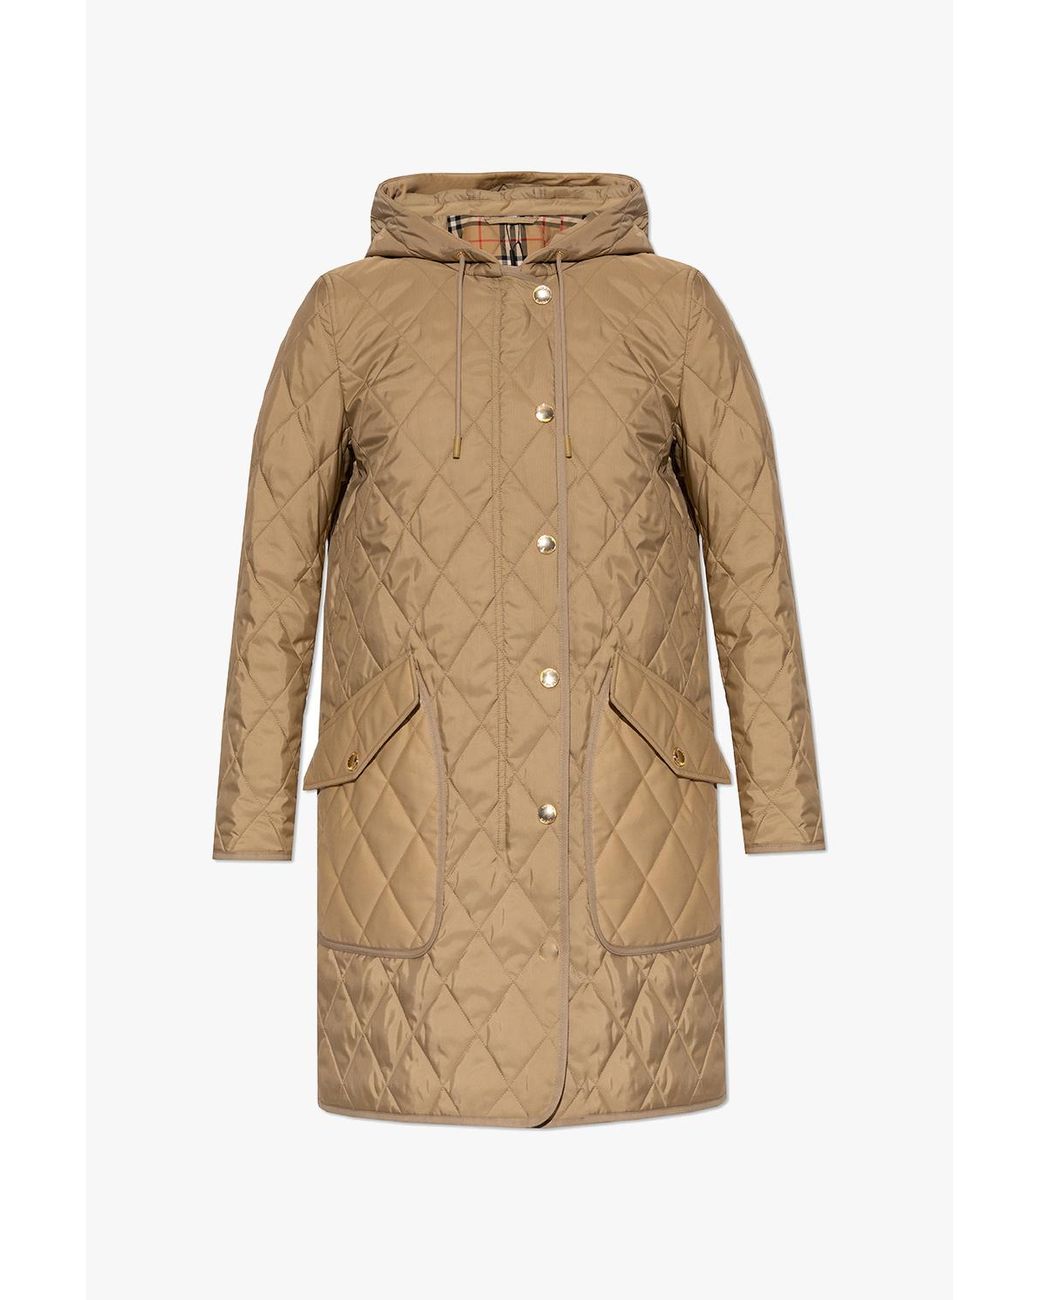 Burberry 'roxby' Quilted Coat With Hood in Natural | Lyst UK